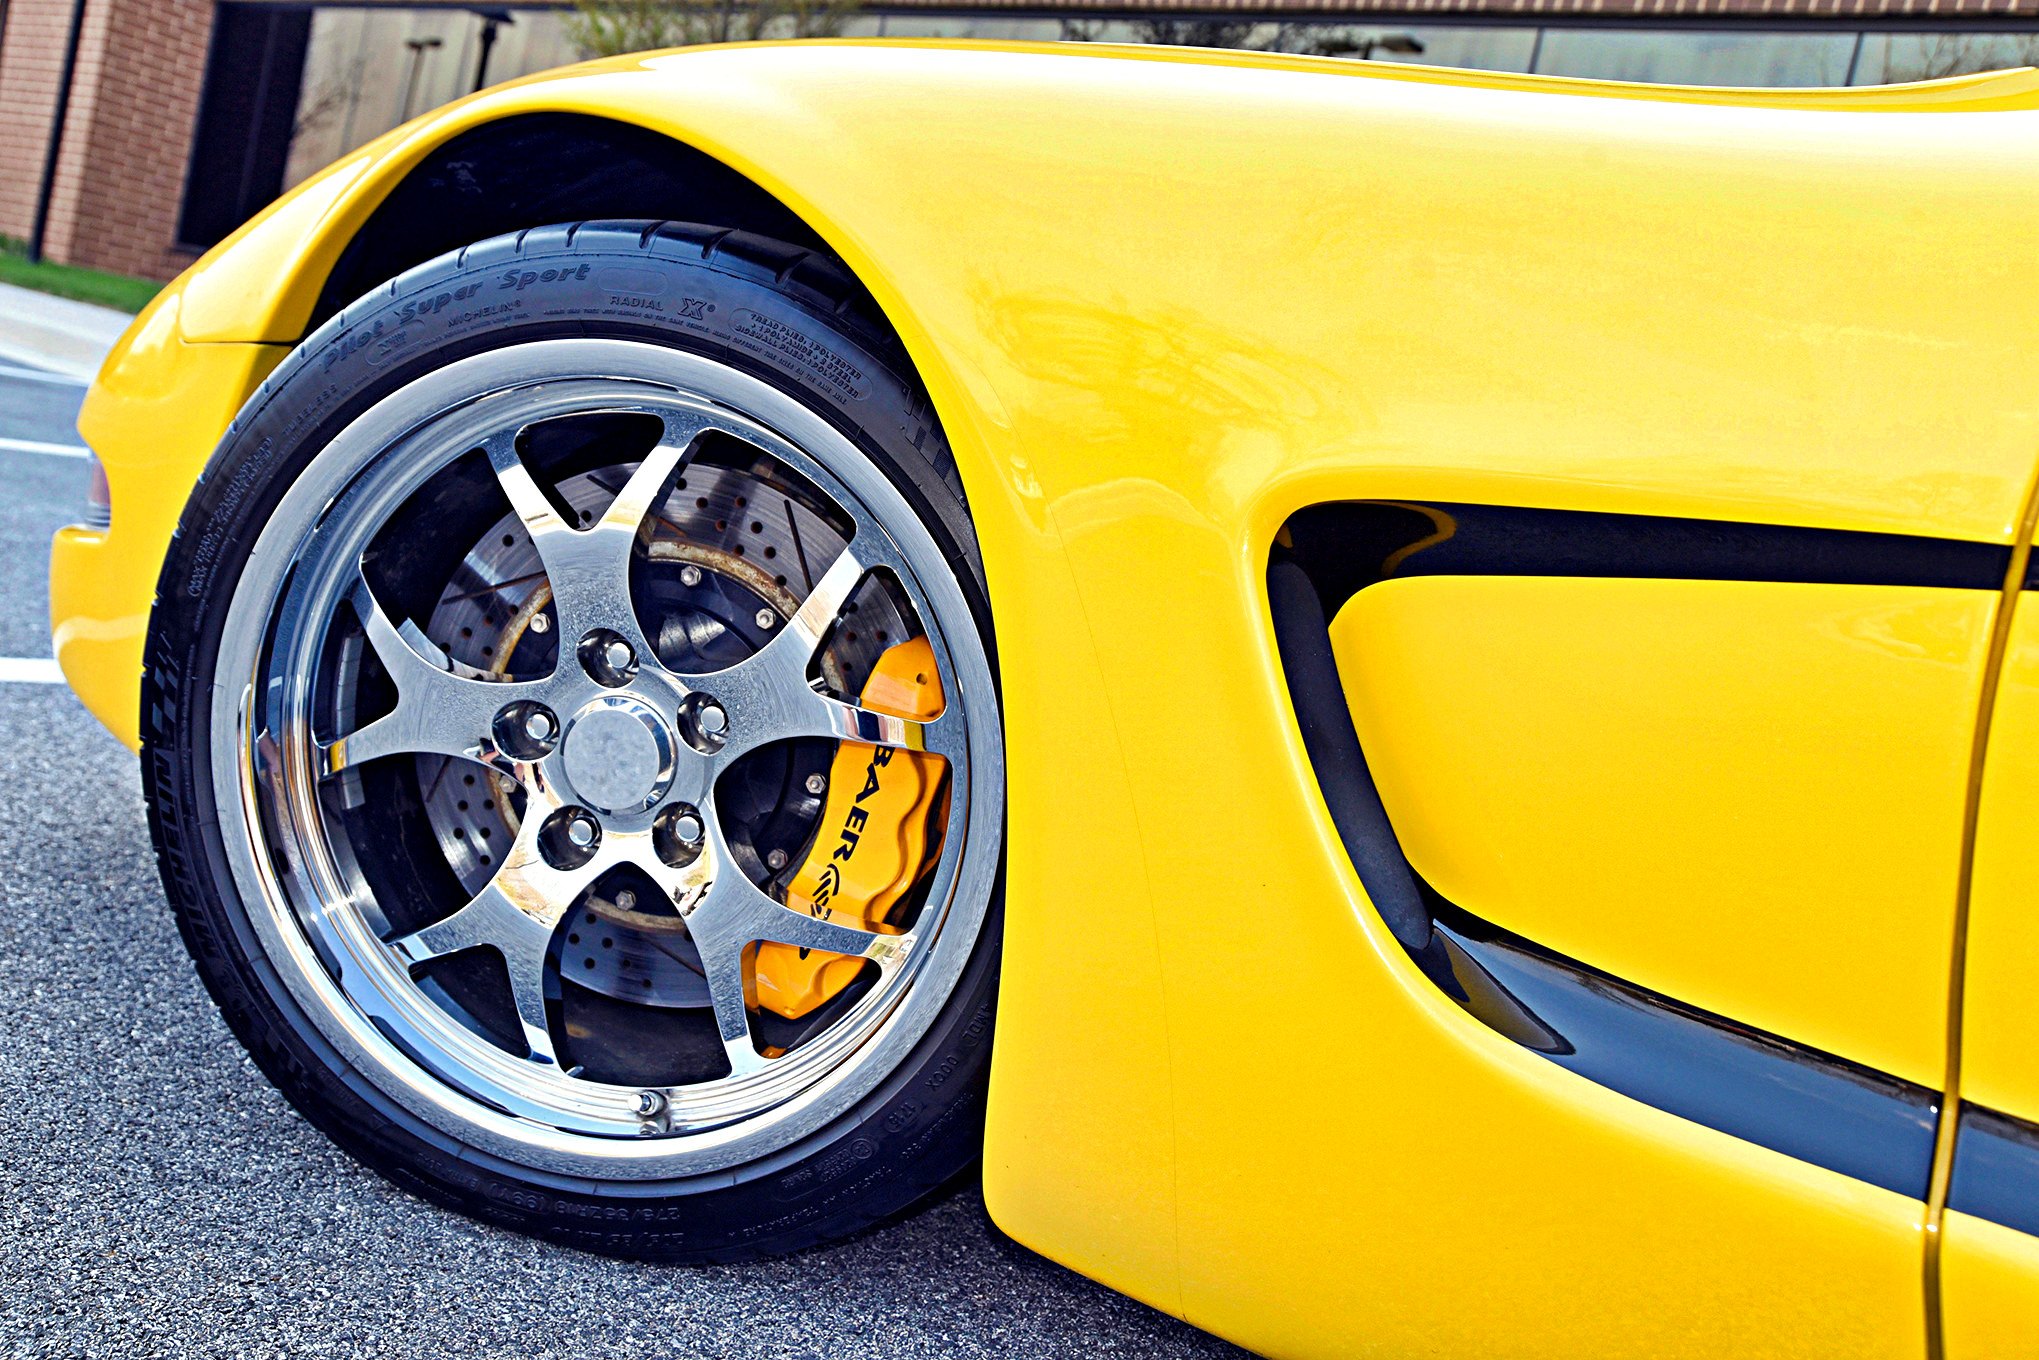 Aftermarket Side Scoops on Yellow Chevy Corvette - Photo by Scotty Lachenauer